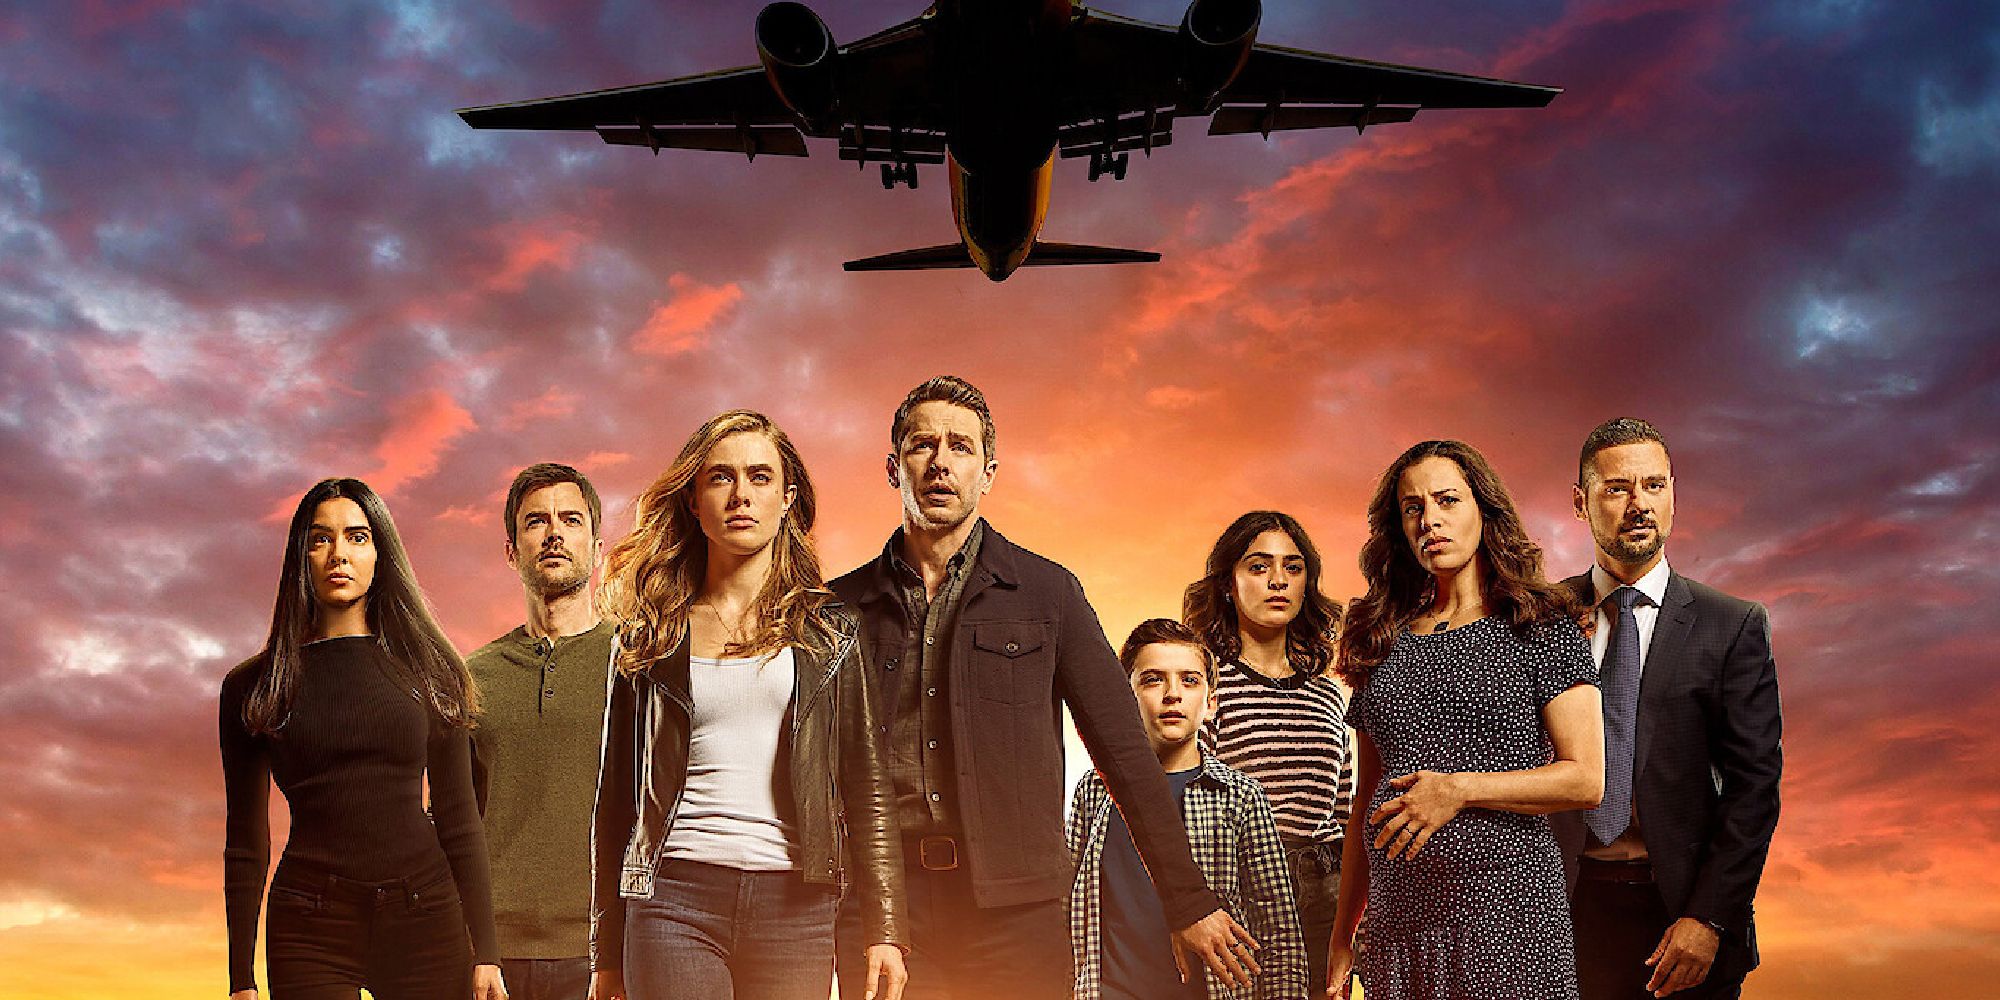 The cast of Manifest posing for a promo image.